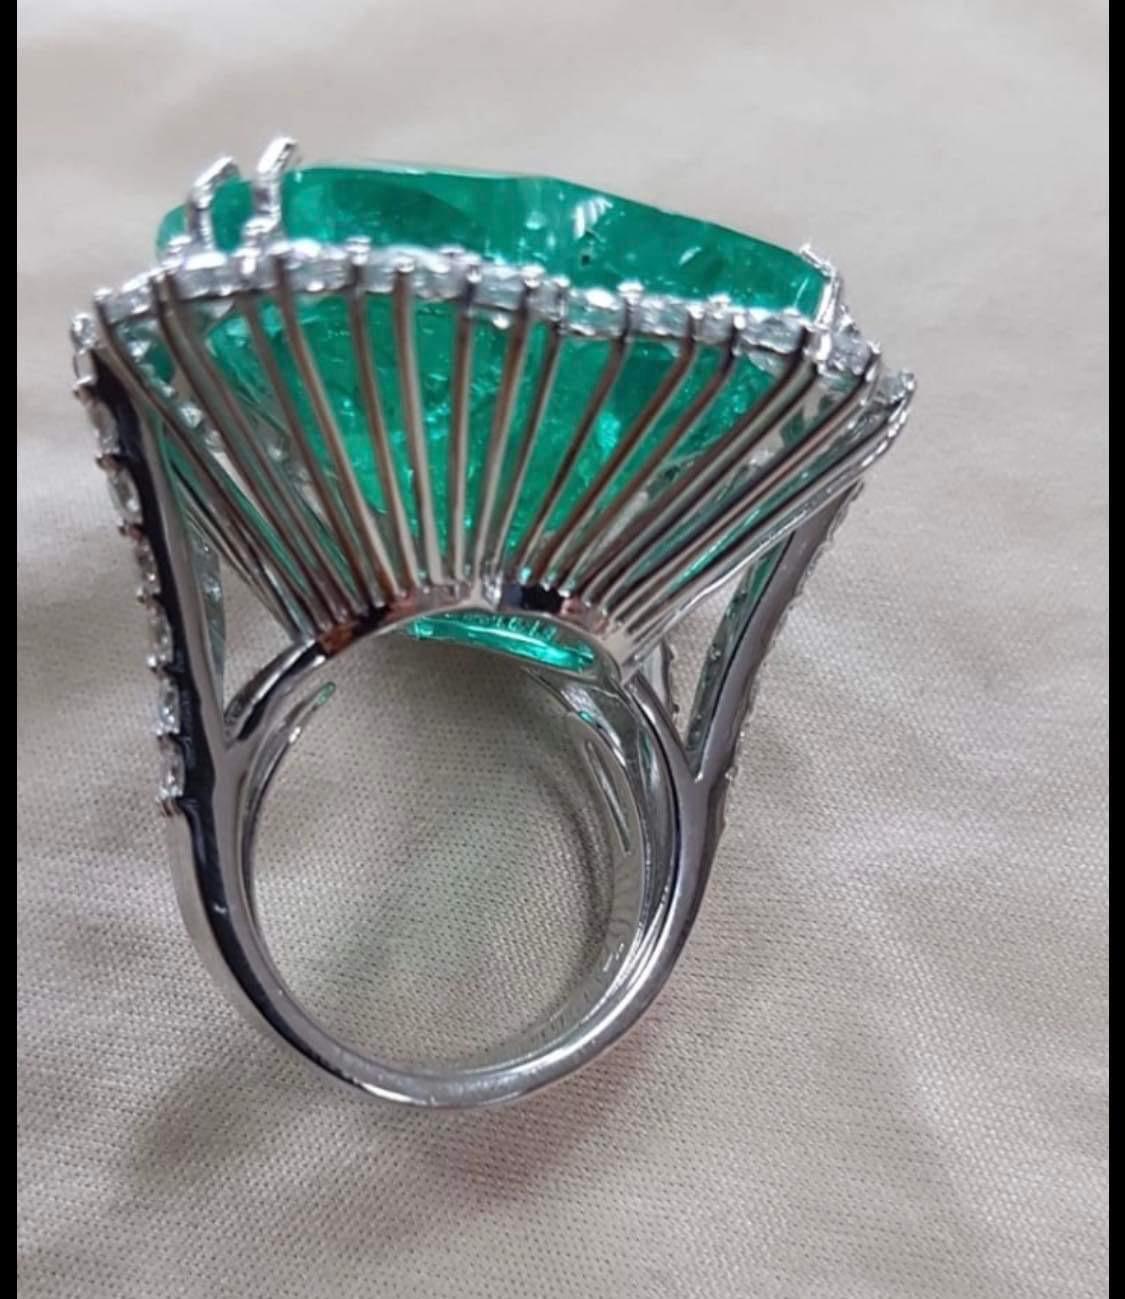 So unforgettable heart cut Colombia emerald 51,00 carats on 18k gold ring with round cut brilliant diamonds 💎.
Exceptional quality and clarity.
Come with important AIG gemological report.
Value over 1000,000,000 euro.